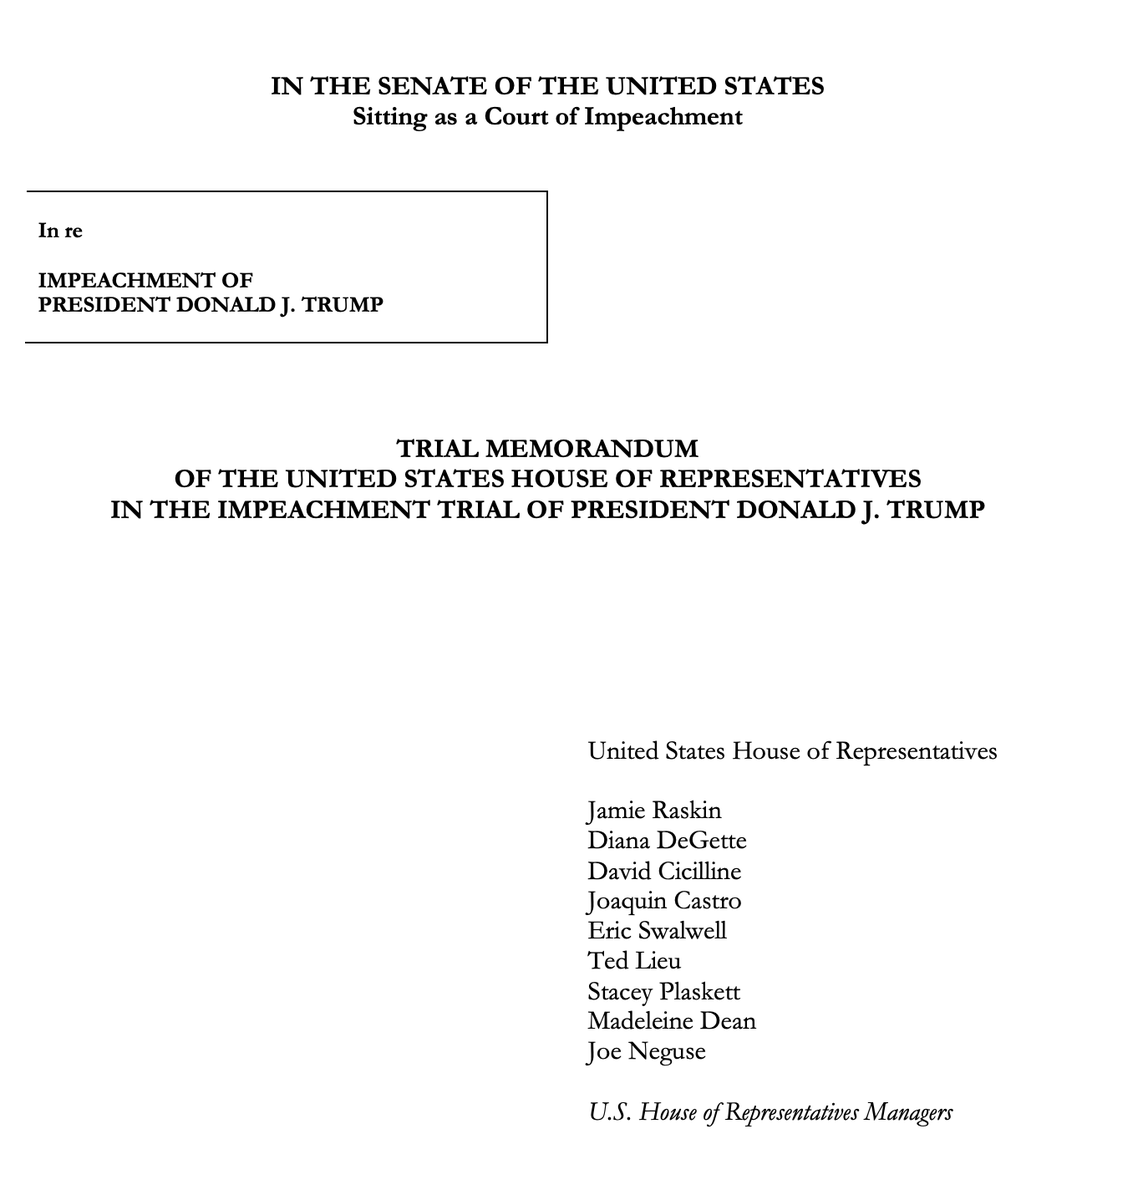 House impeachment managers this morning filed their 80-page pre-trial brief for the Senate impeachment trial of former President Donald J. Trump. https://judiciary.house.gov/uploadedfiles/house_trial_brief_final.pdf?utm_campaign=5706-519